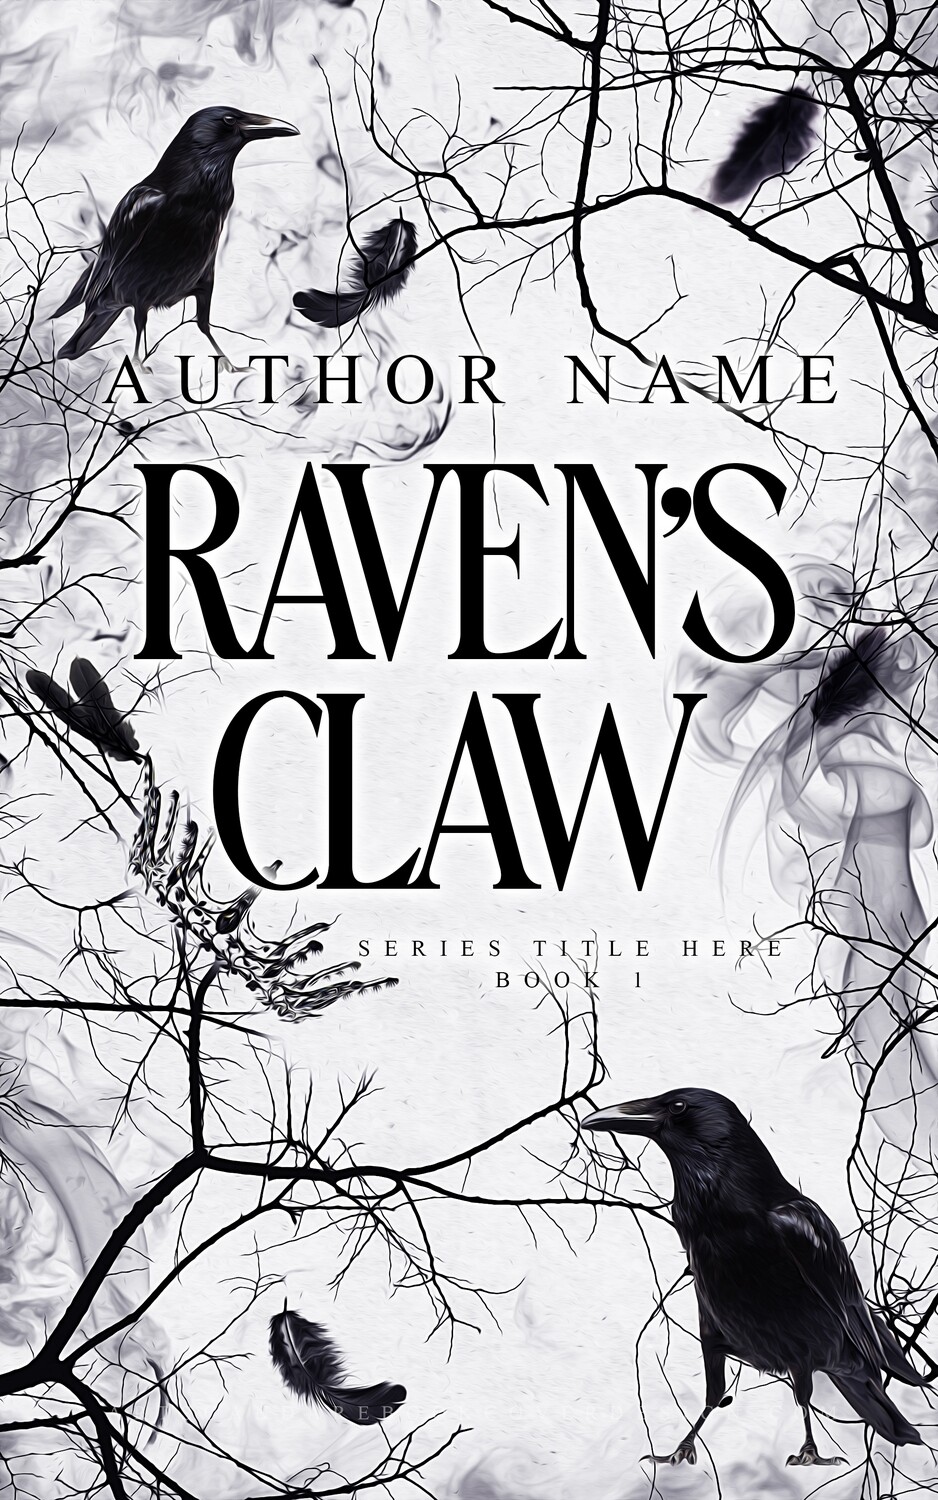 RAVEN'S CLAW